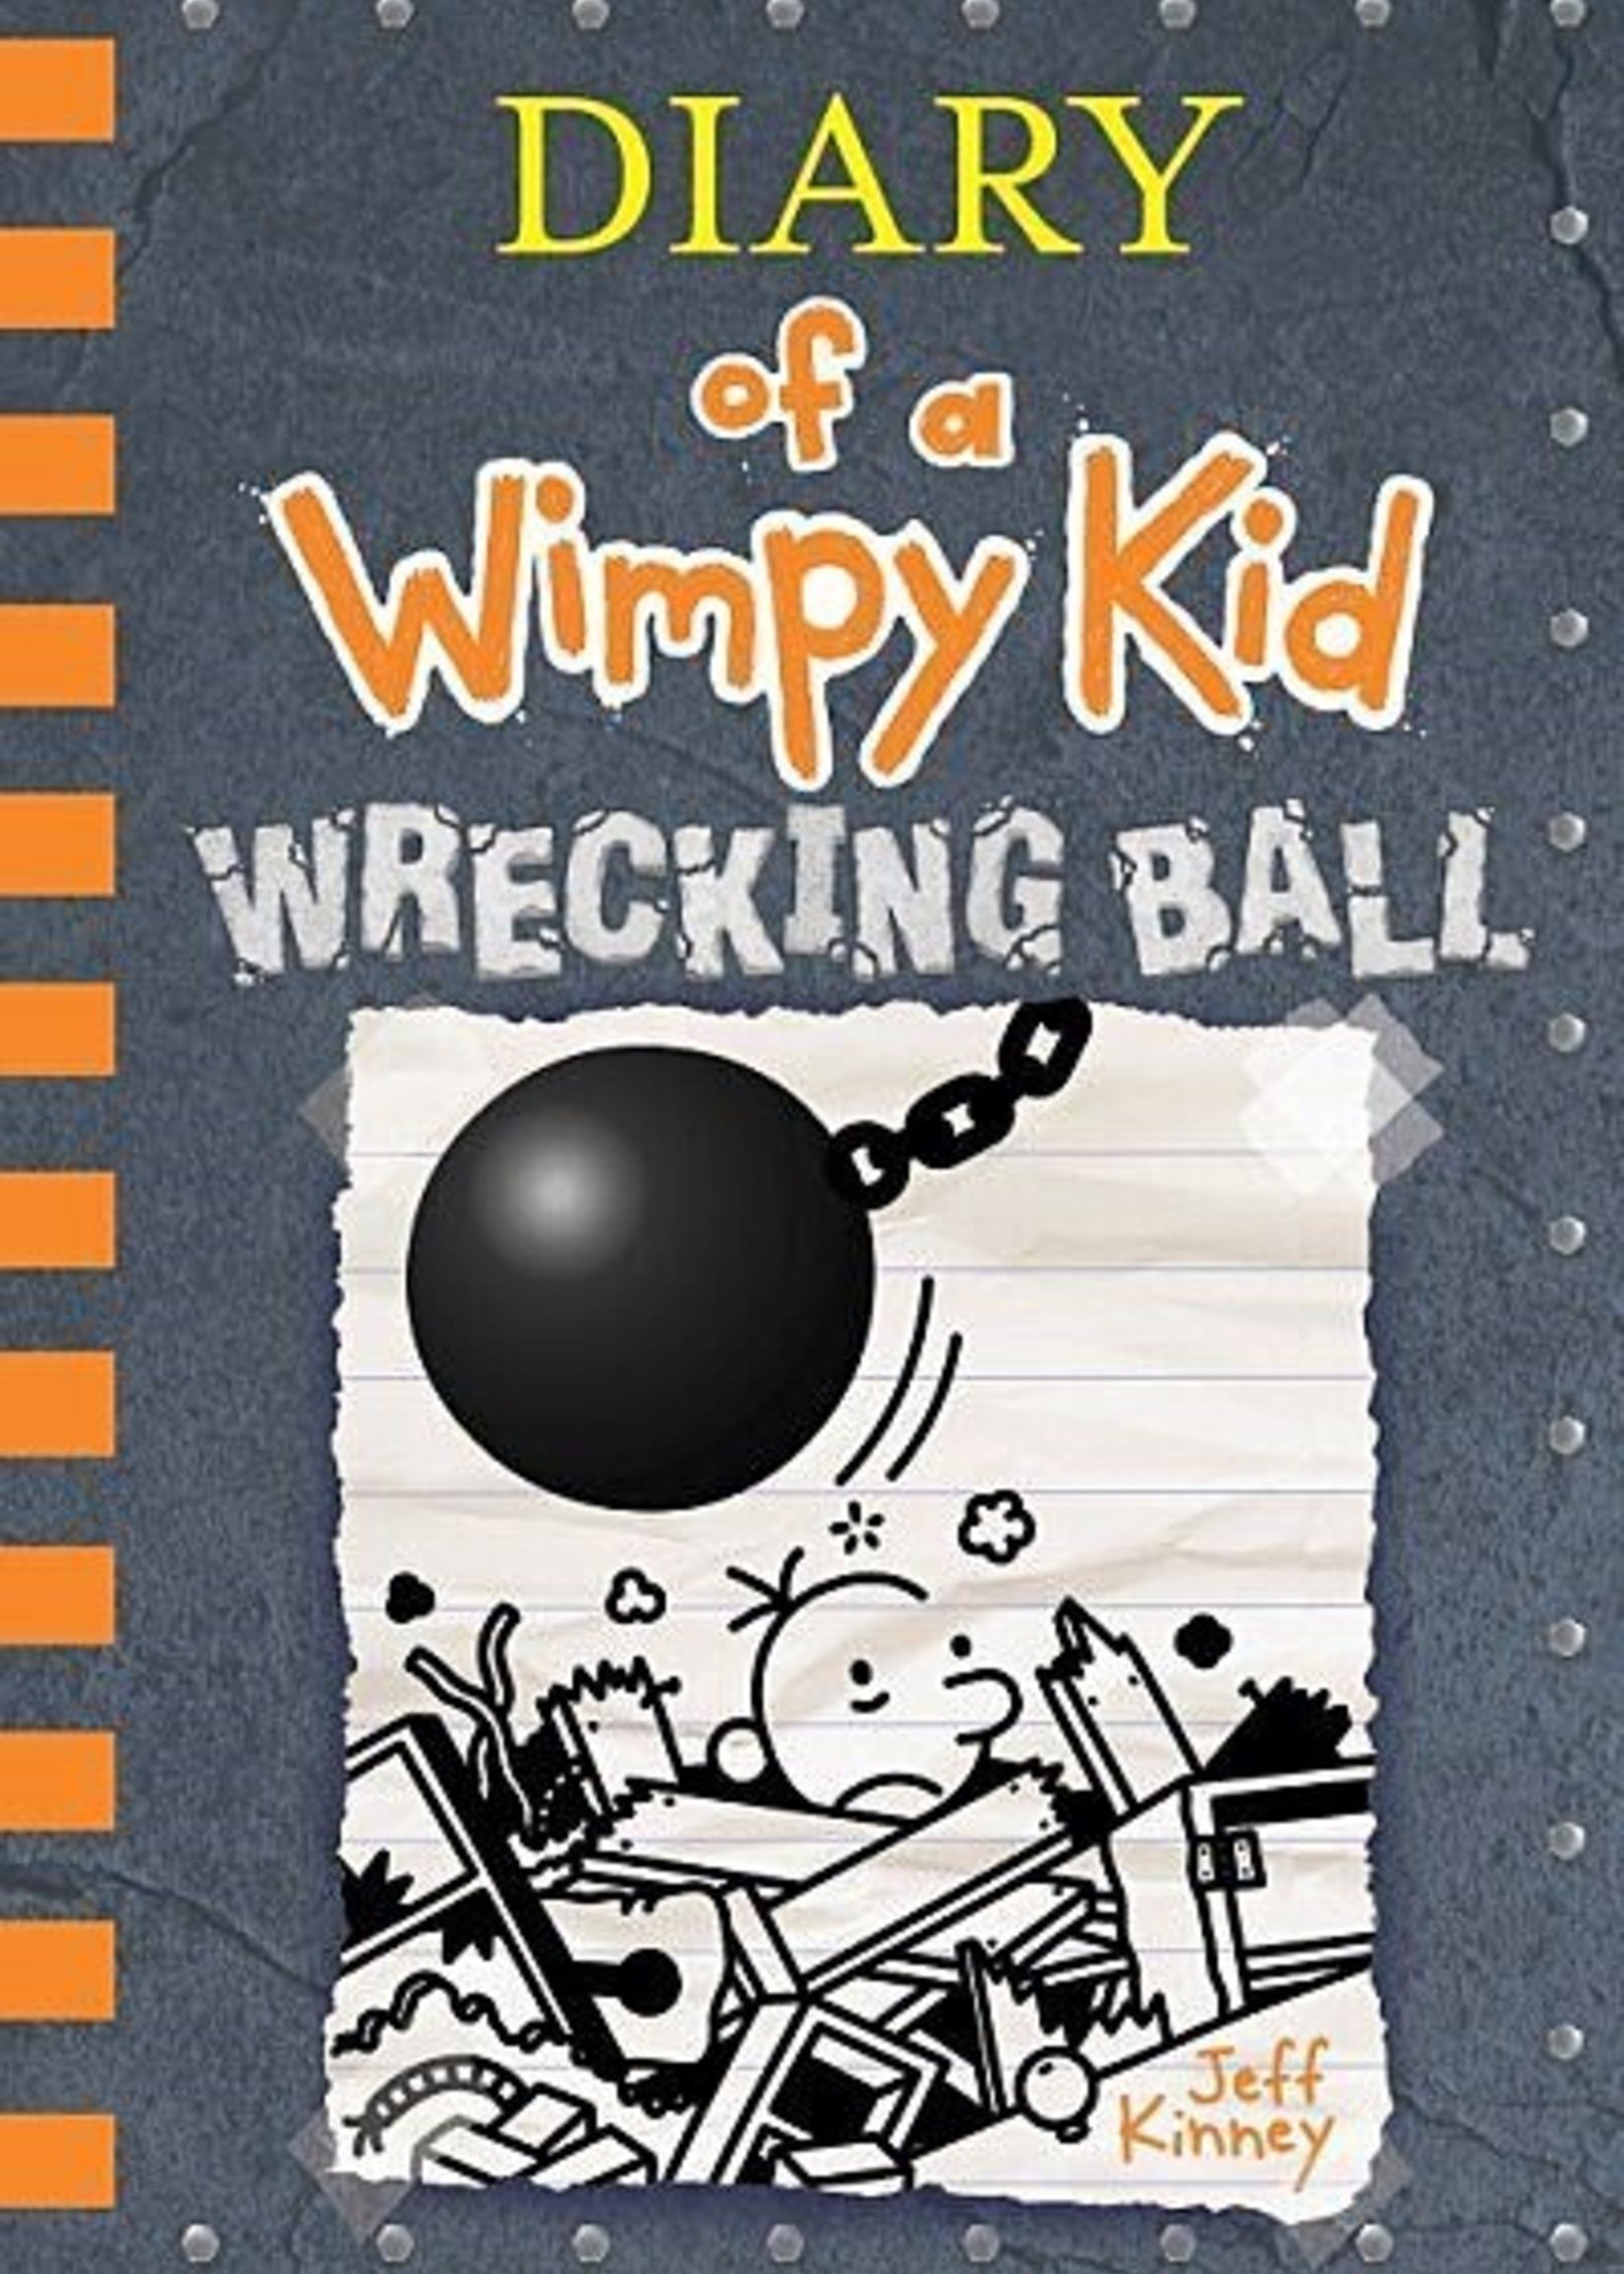 Diary of a Wimpy Kid Illustrated Novel #14, Wrecking Ball - Hardcover